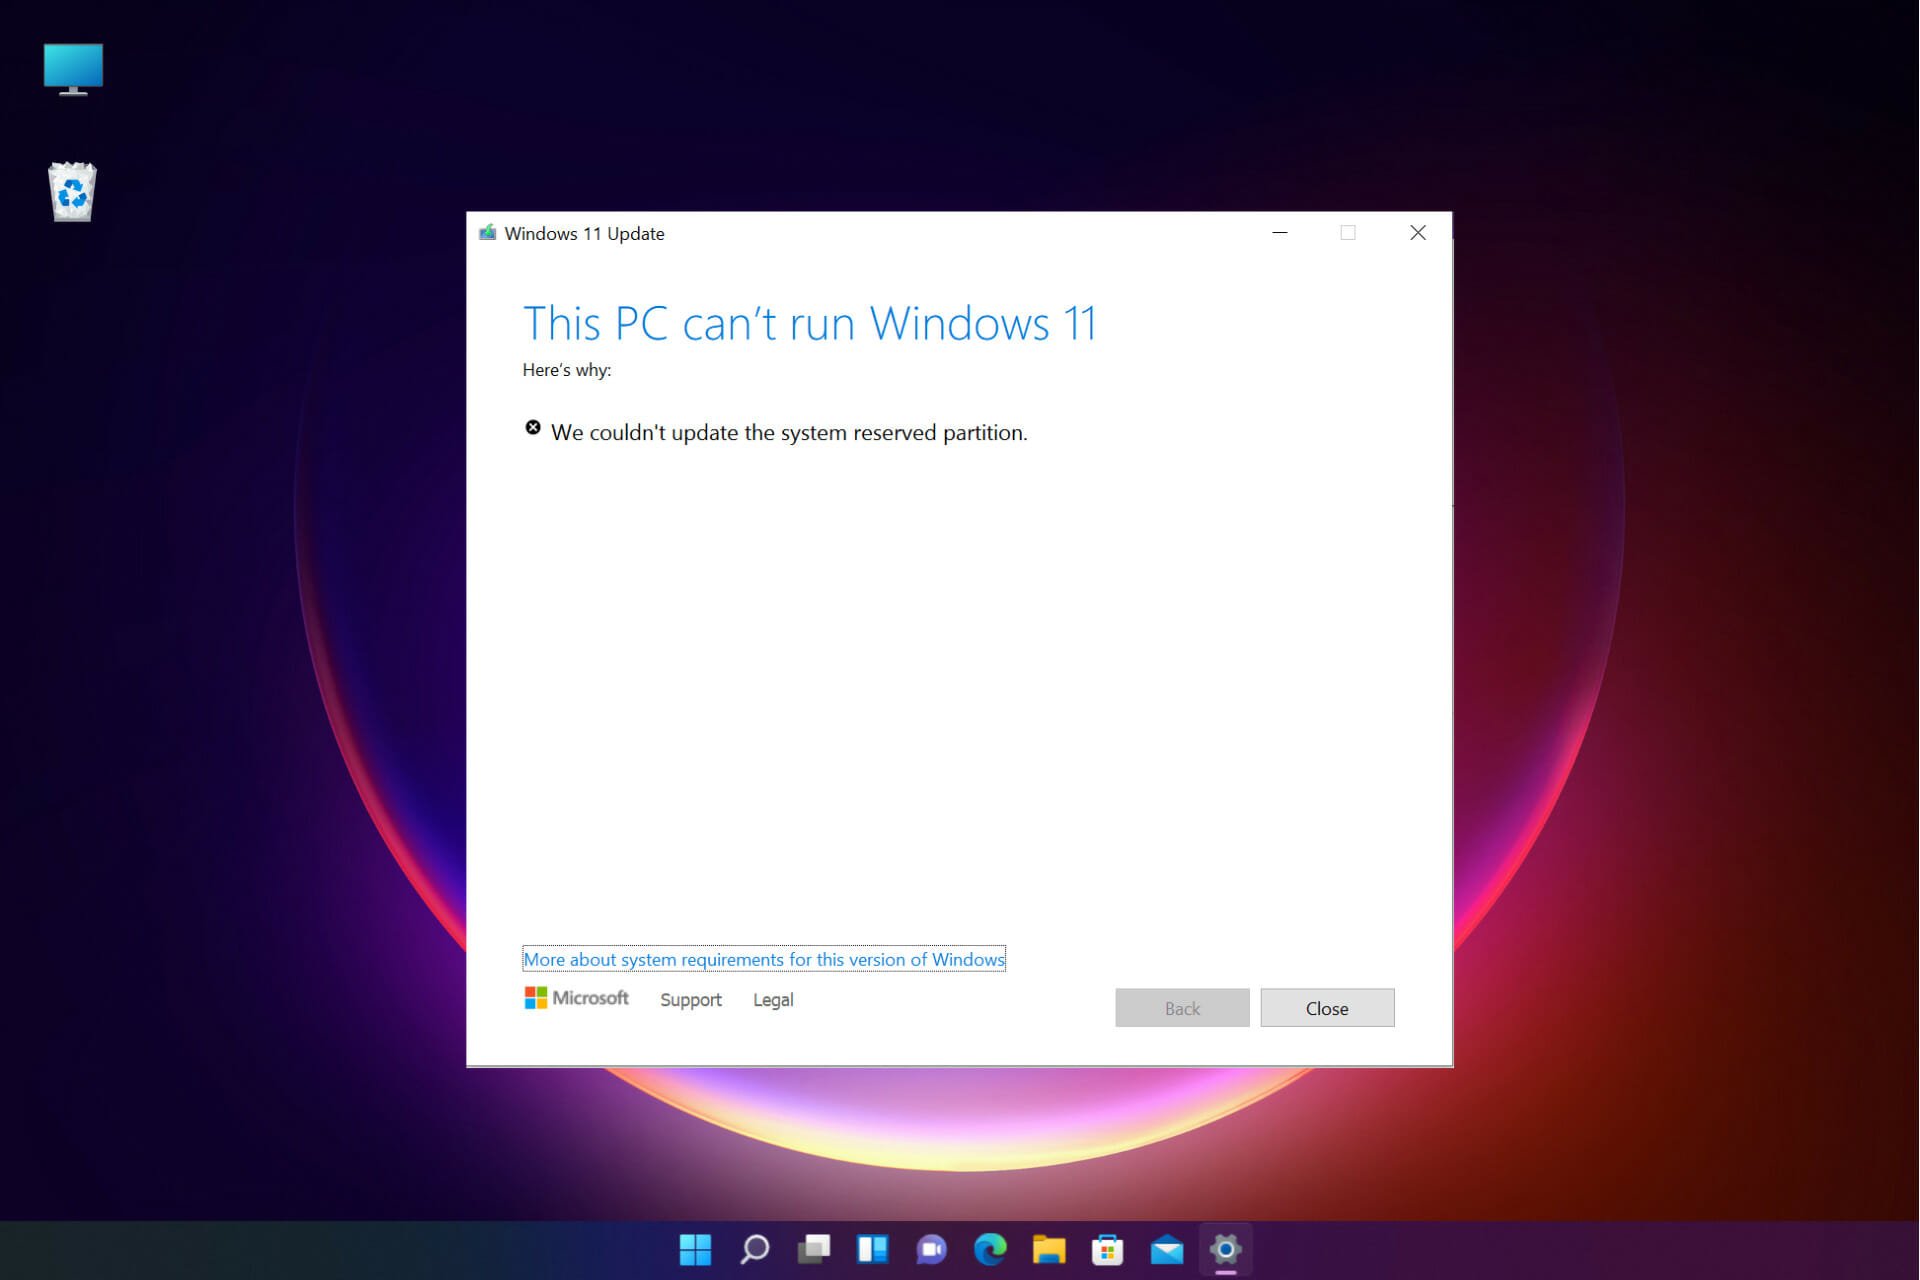 Hot to fix the We couldn't update the system reserved partition on Windows 11